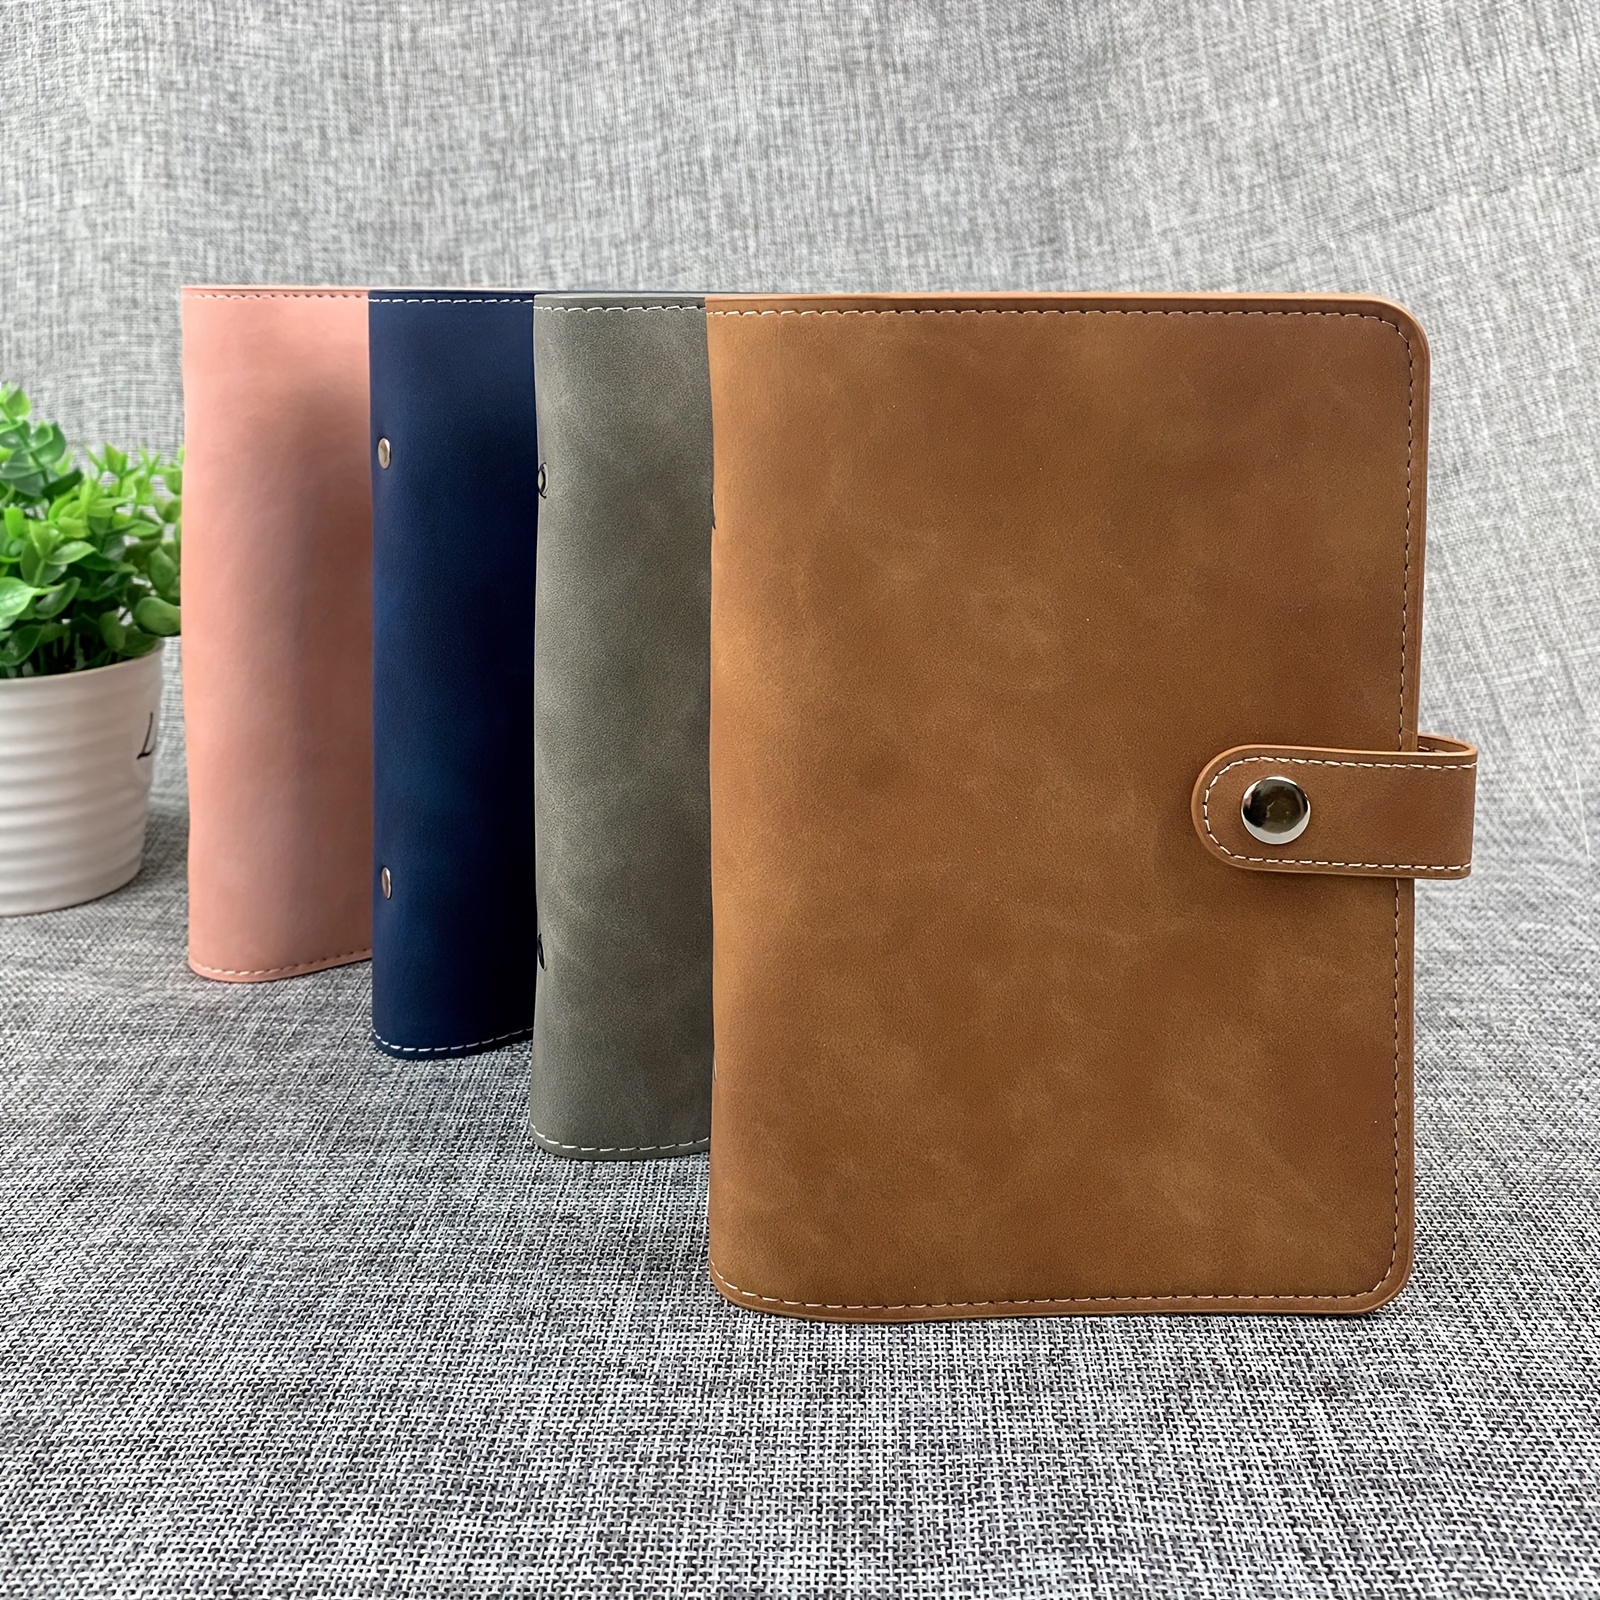 Source Wholesale Budget Planner Binder A5 A6 A7 Pu Leather 6 Ring Budget  Binder Leather Wallet A6 A7 Planner A7 Binder on m.